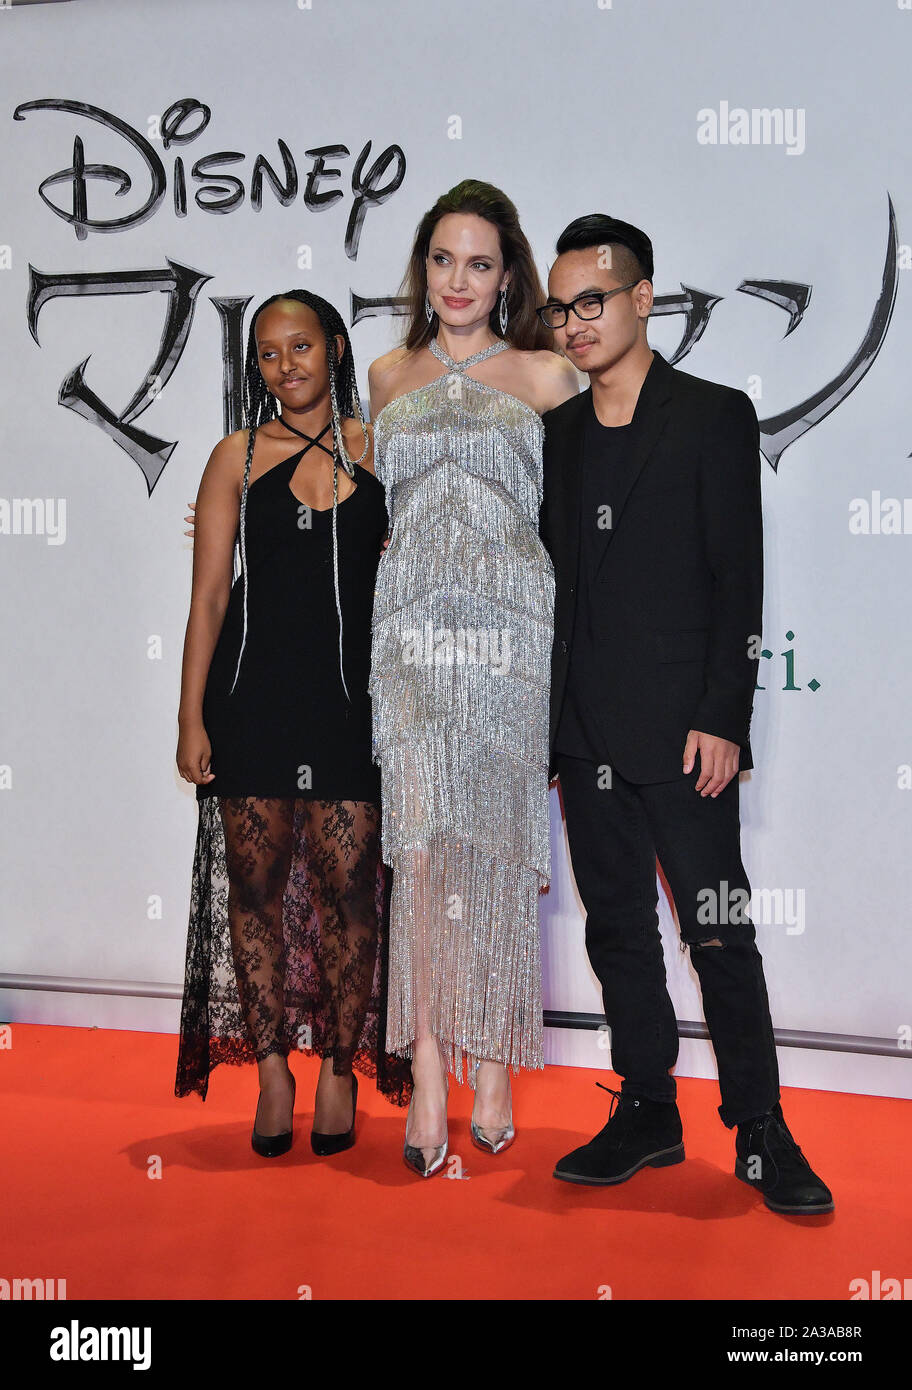 (L-R)Zahara Marley Jolie-Pitt, Angelina Jolie and Maddox Jolie-Pitt attend the Japan premiere for 'Maleficent: Mistress of Evil' at Roppongi Hills Arena in Tokyo, Japan on October 3, 2019. Credit: AFLO/Alamy Live News Stock Photo